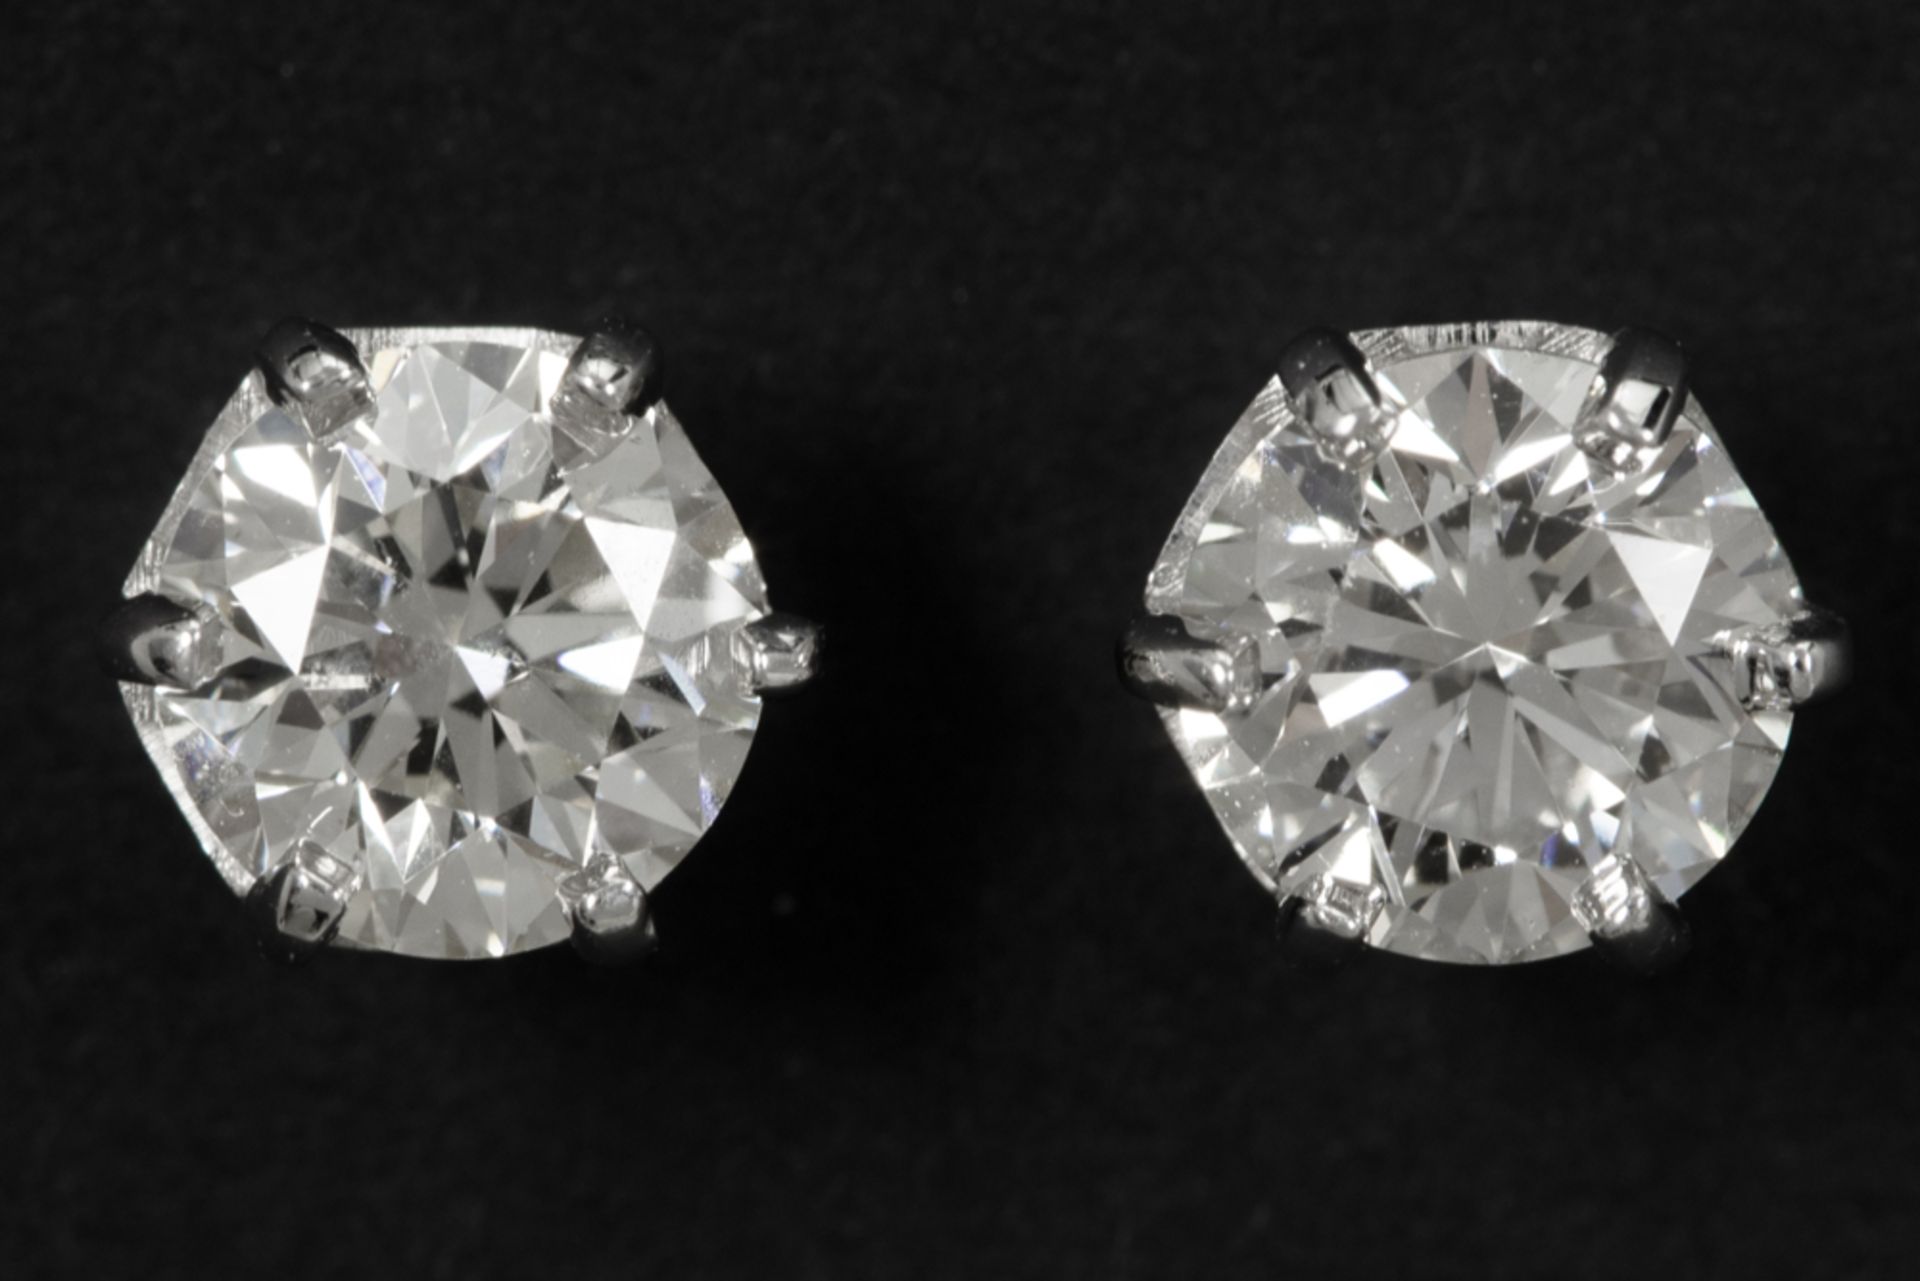 pair of earrings in white gold (18 carat) each with one high quality brilliant cut diamond (together